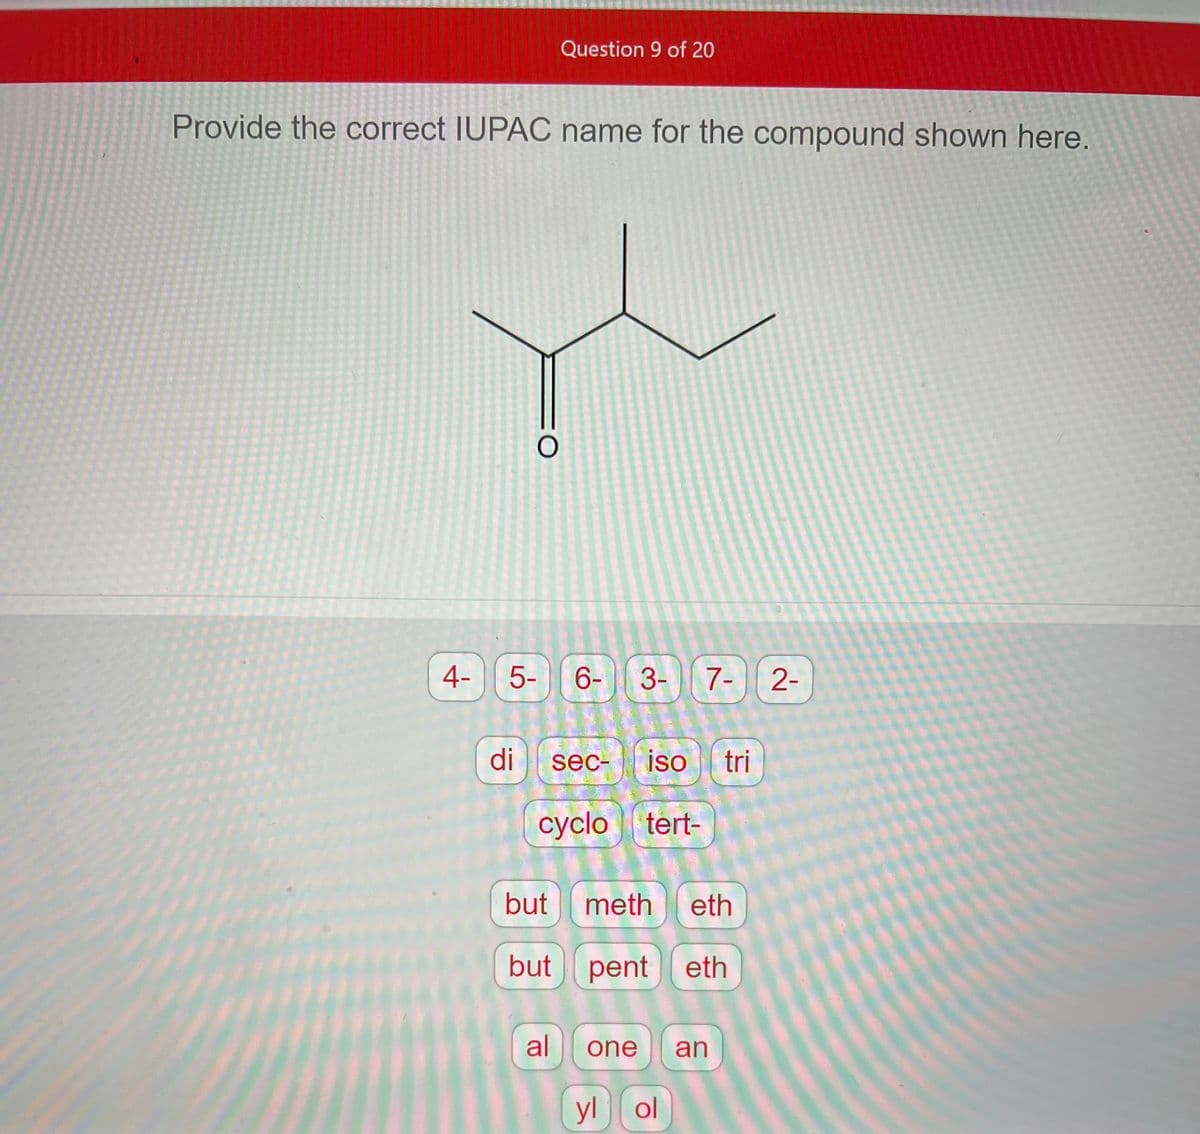 Provide the correct IUPAC name for the compound shown here.
Question 9 of 20
Y
O
4- 5- 6-
di
3-
al
cyclo tert-
sec- iso tri
7- 2-
but meth eth
but pent eth
one an
yl ol